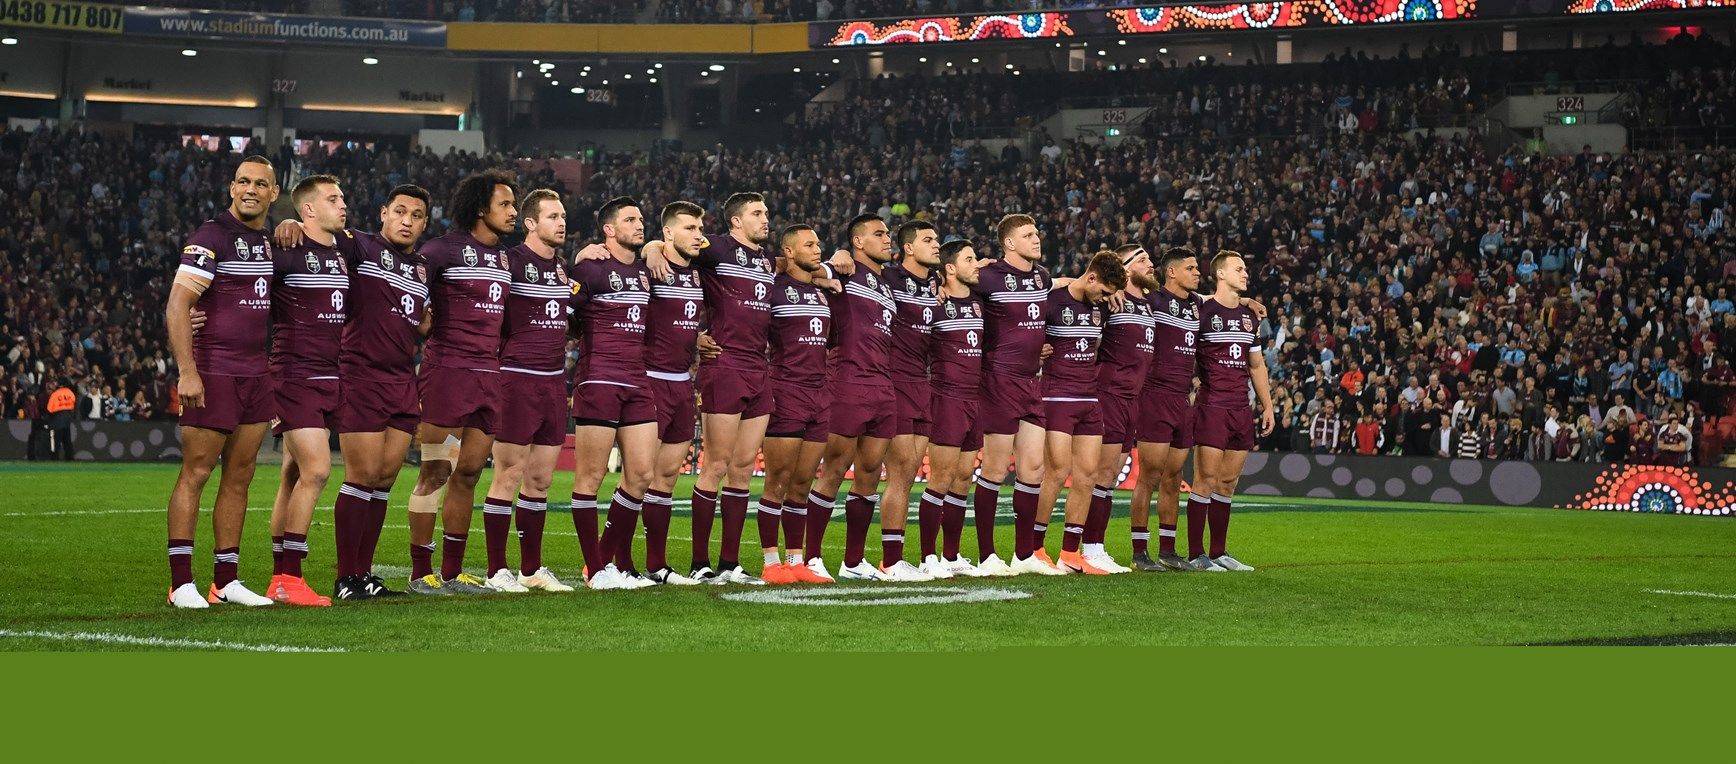 Best photo from State of Origin I